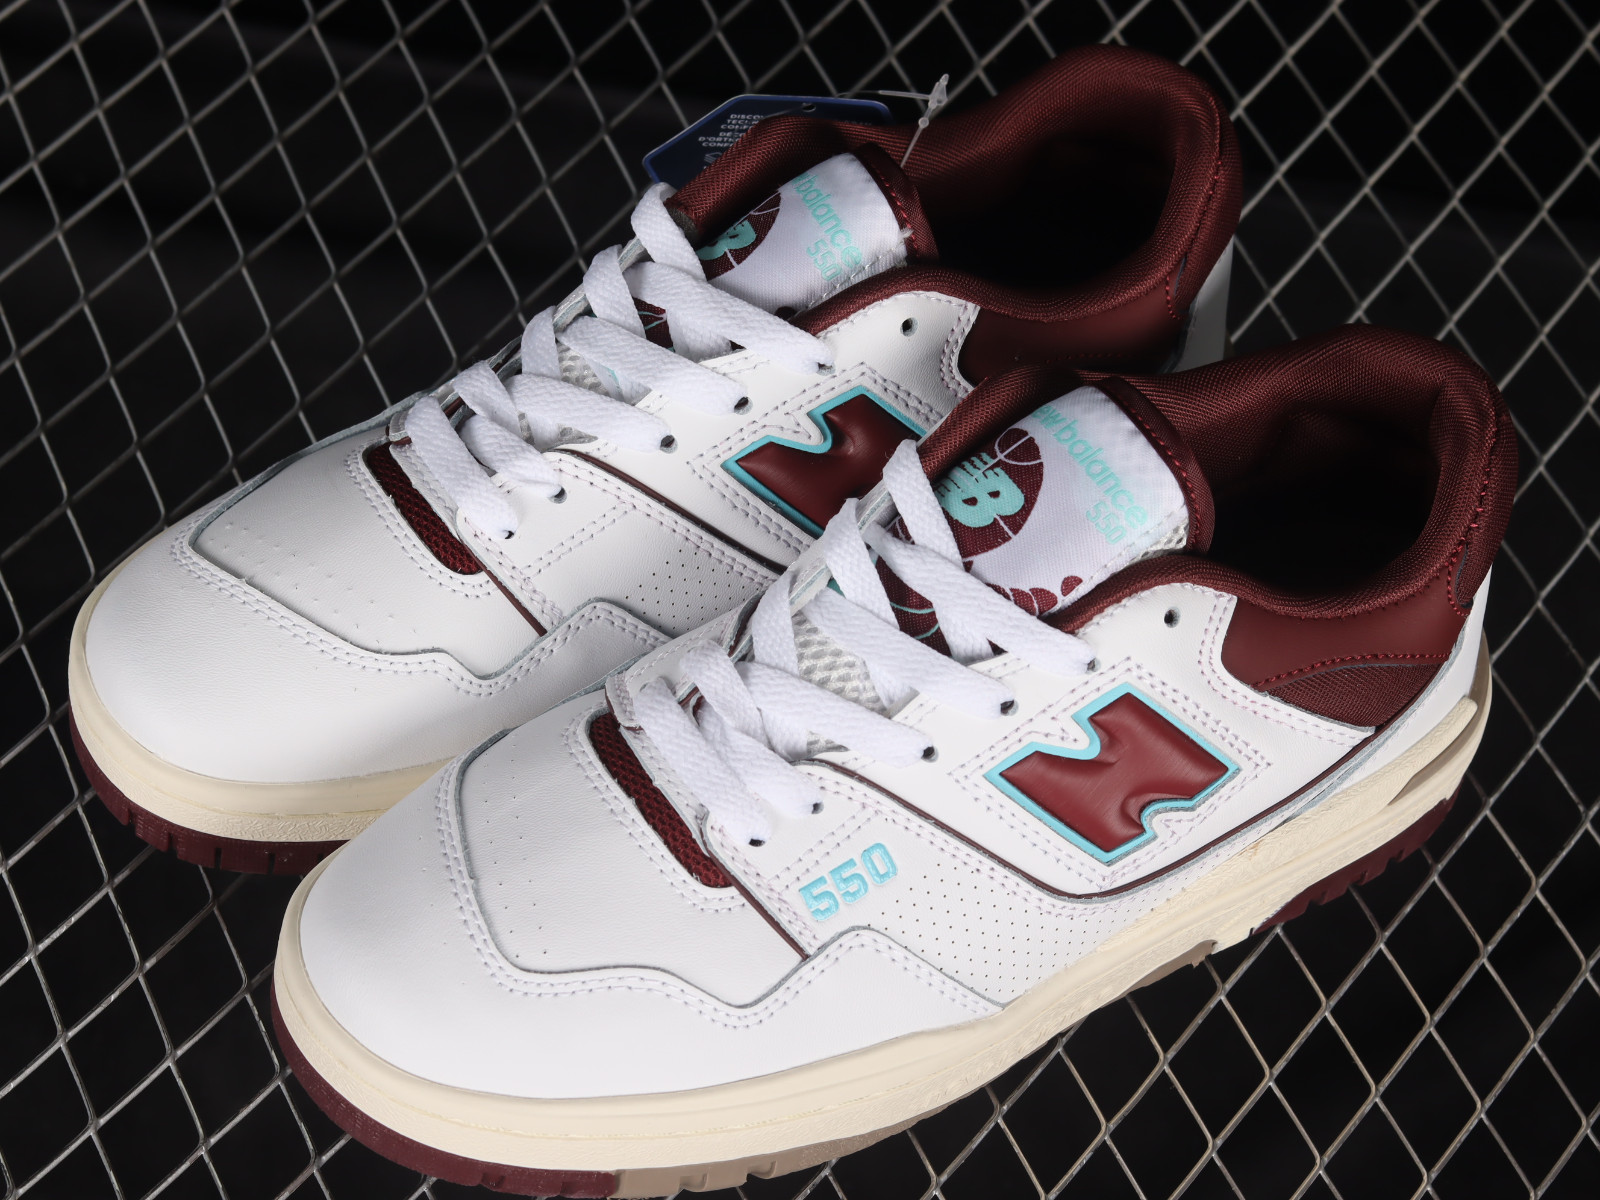 New Balance 550 White Maroon for Sale, Authenticity Guaranteed